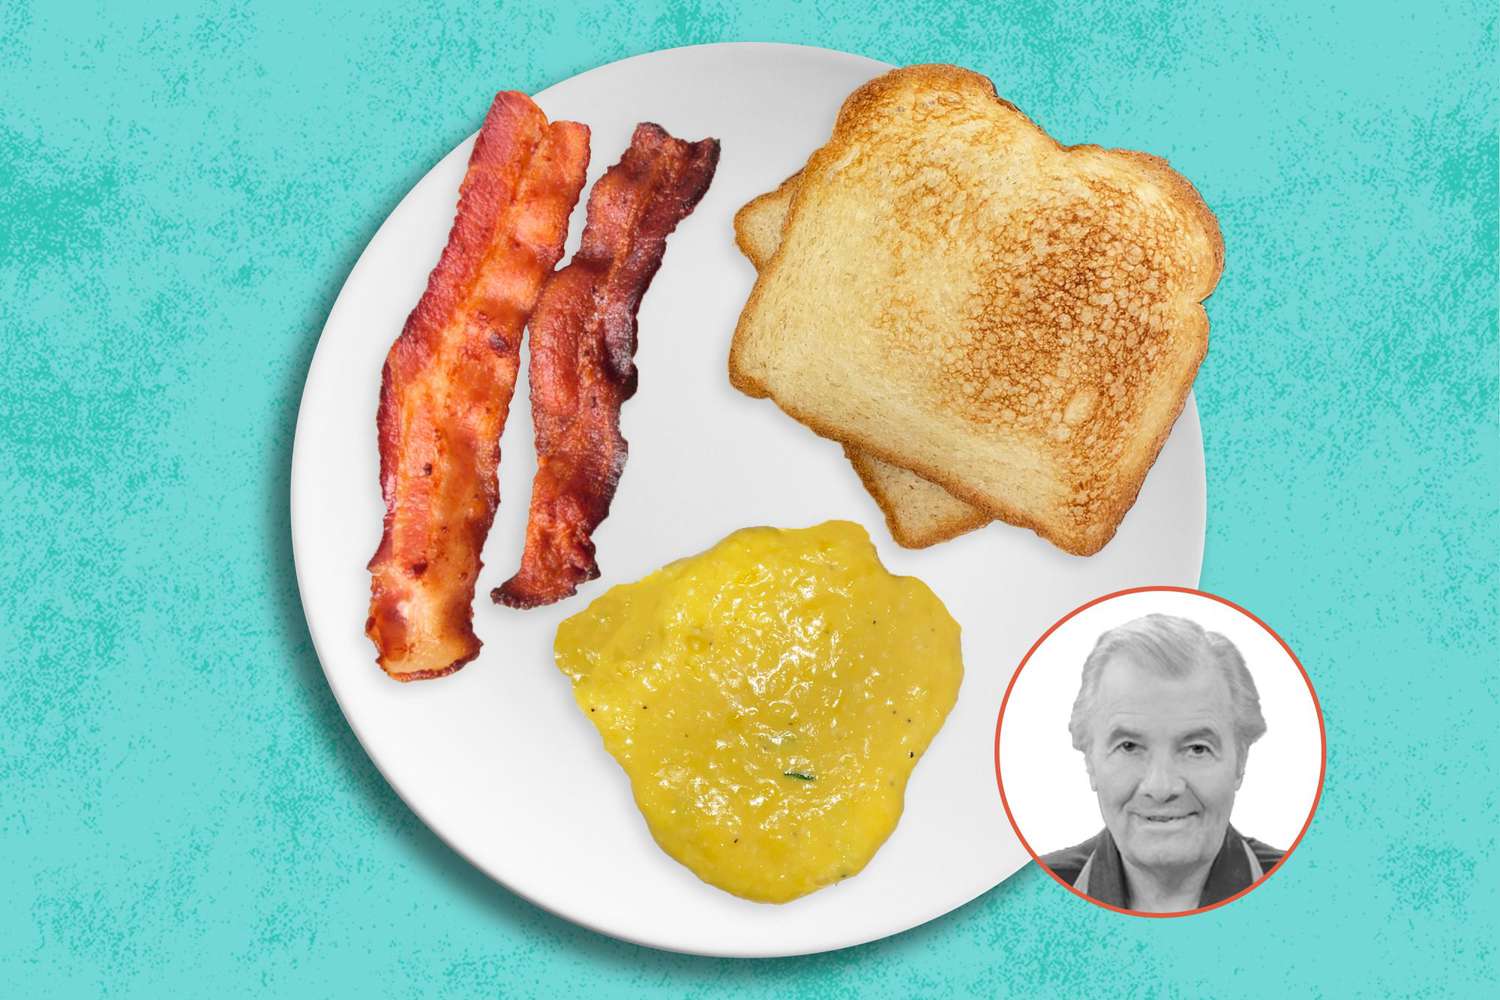 plate of scrambled eggs, bacon, and toast with Jacques Pepin's face